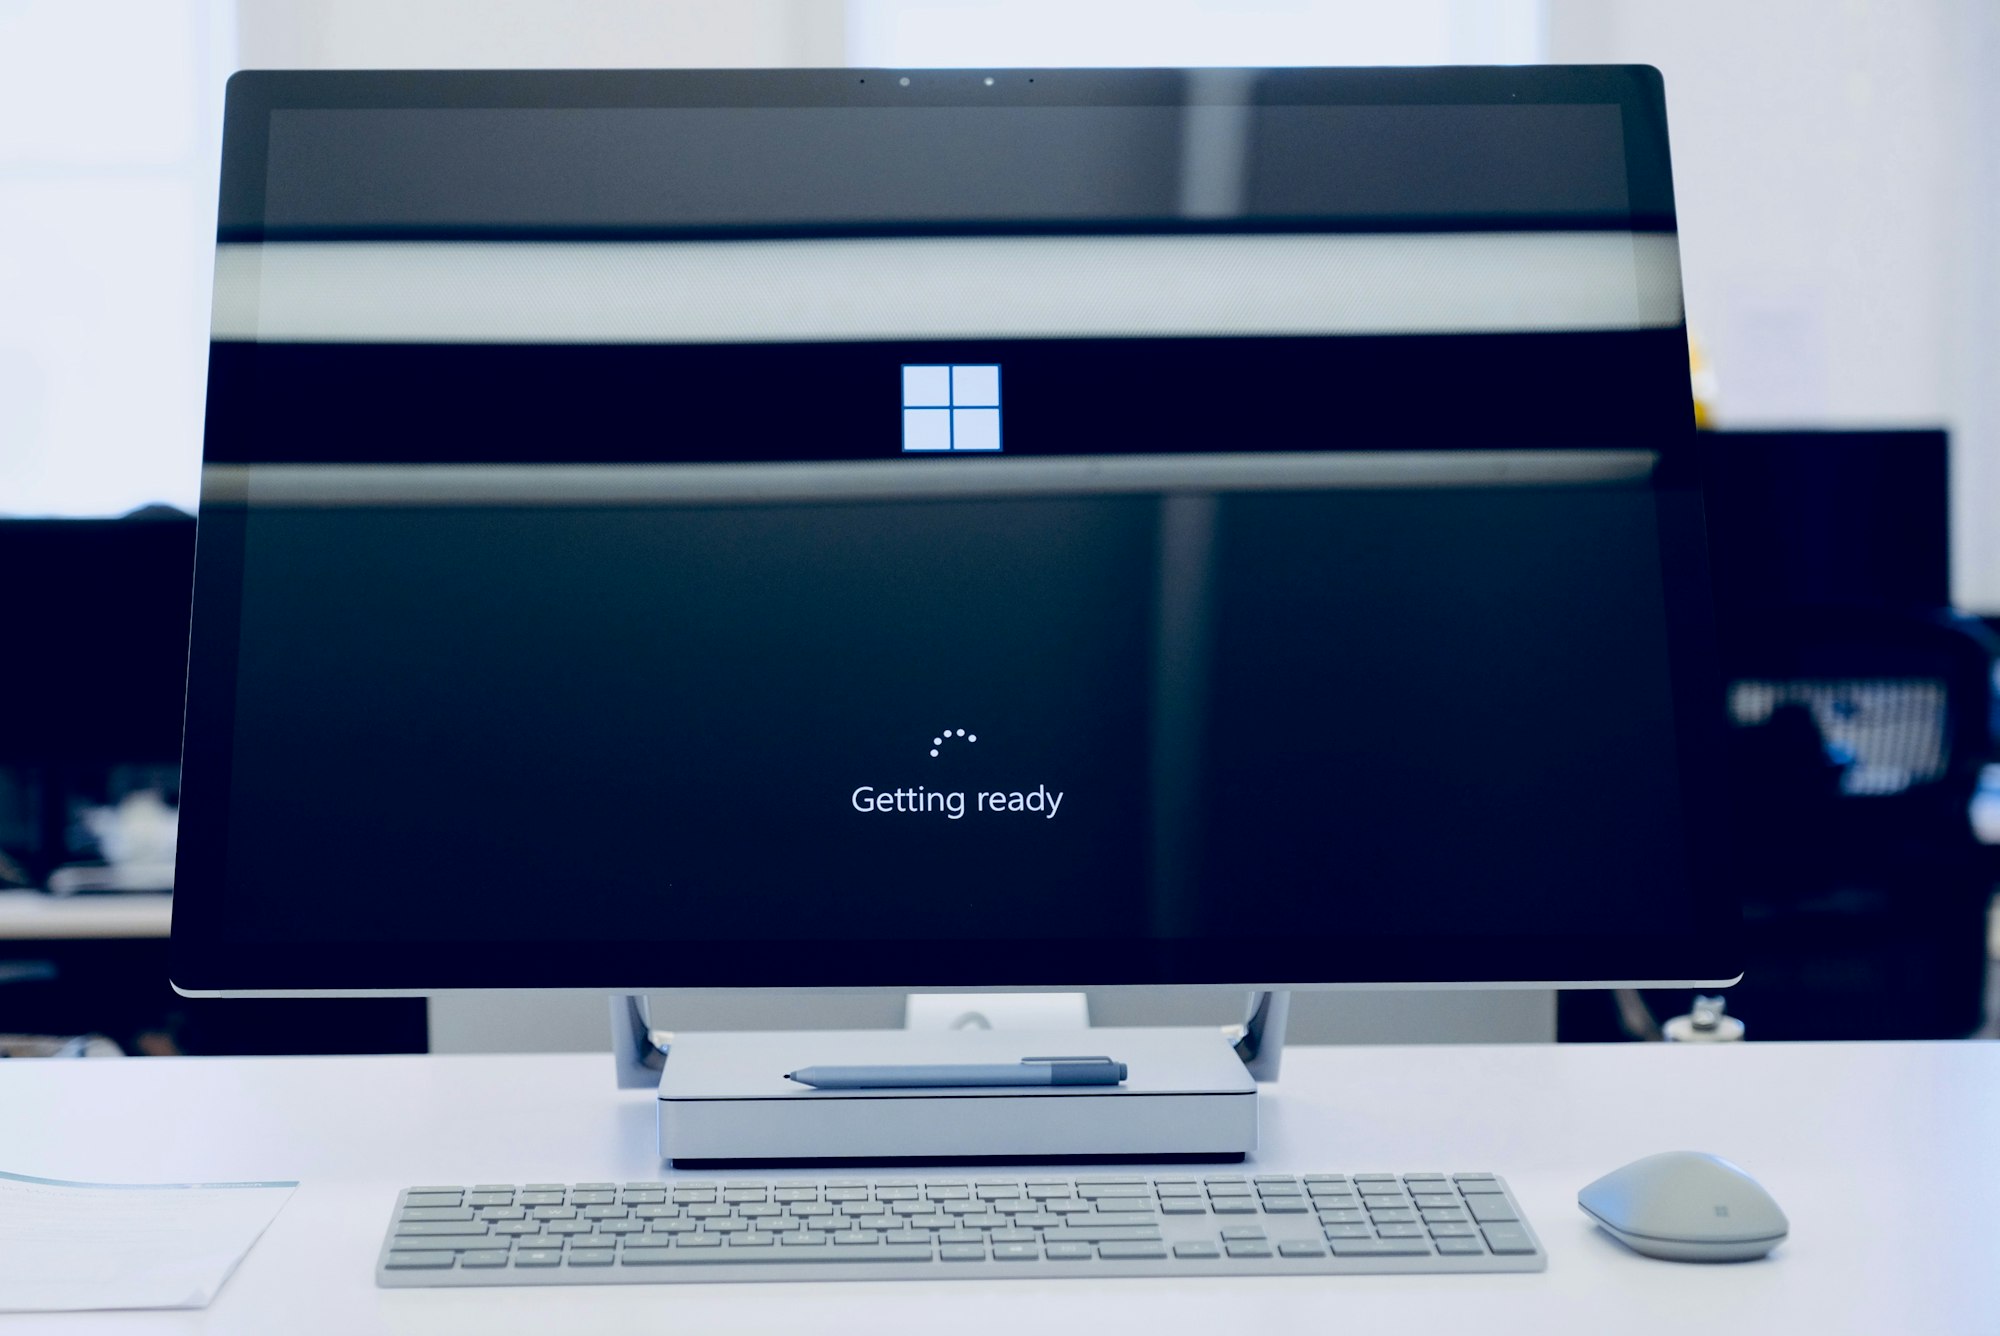 How to Install Windows 11 on a MacBook